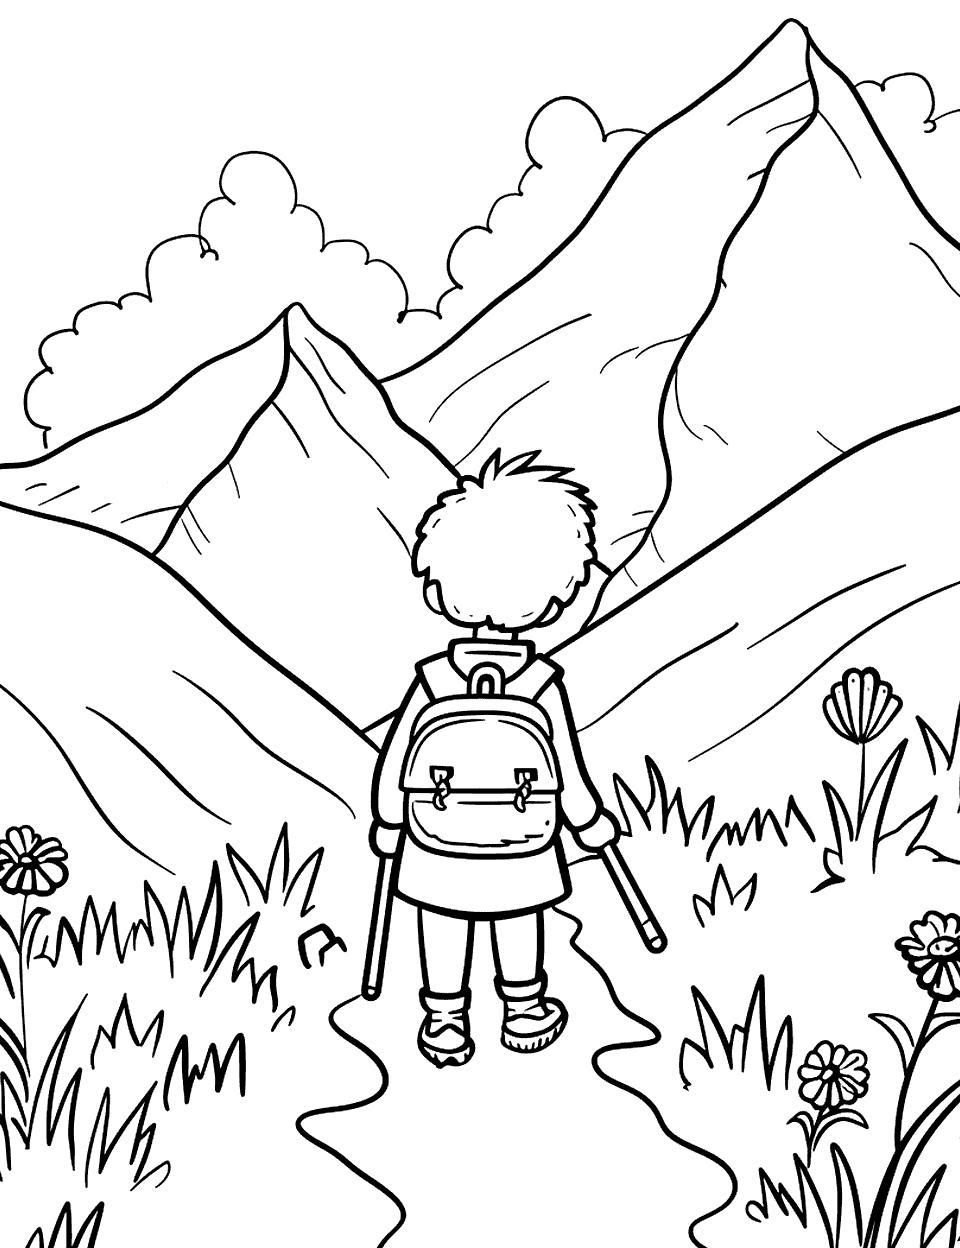 Mountain Hiking Toddler Coloring Page - A simple mountain path with a child standing at the beginning, ready to explore.